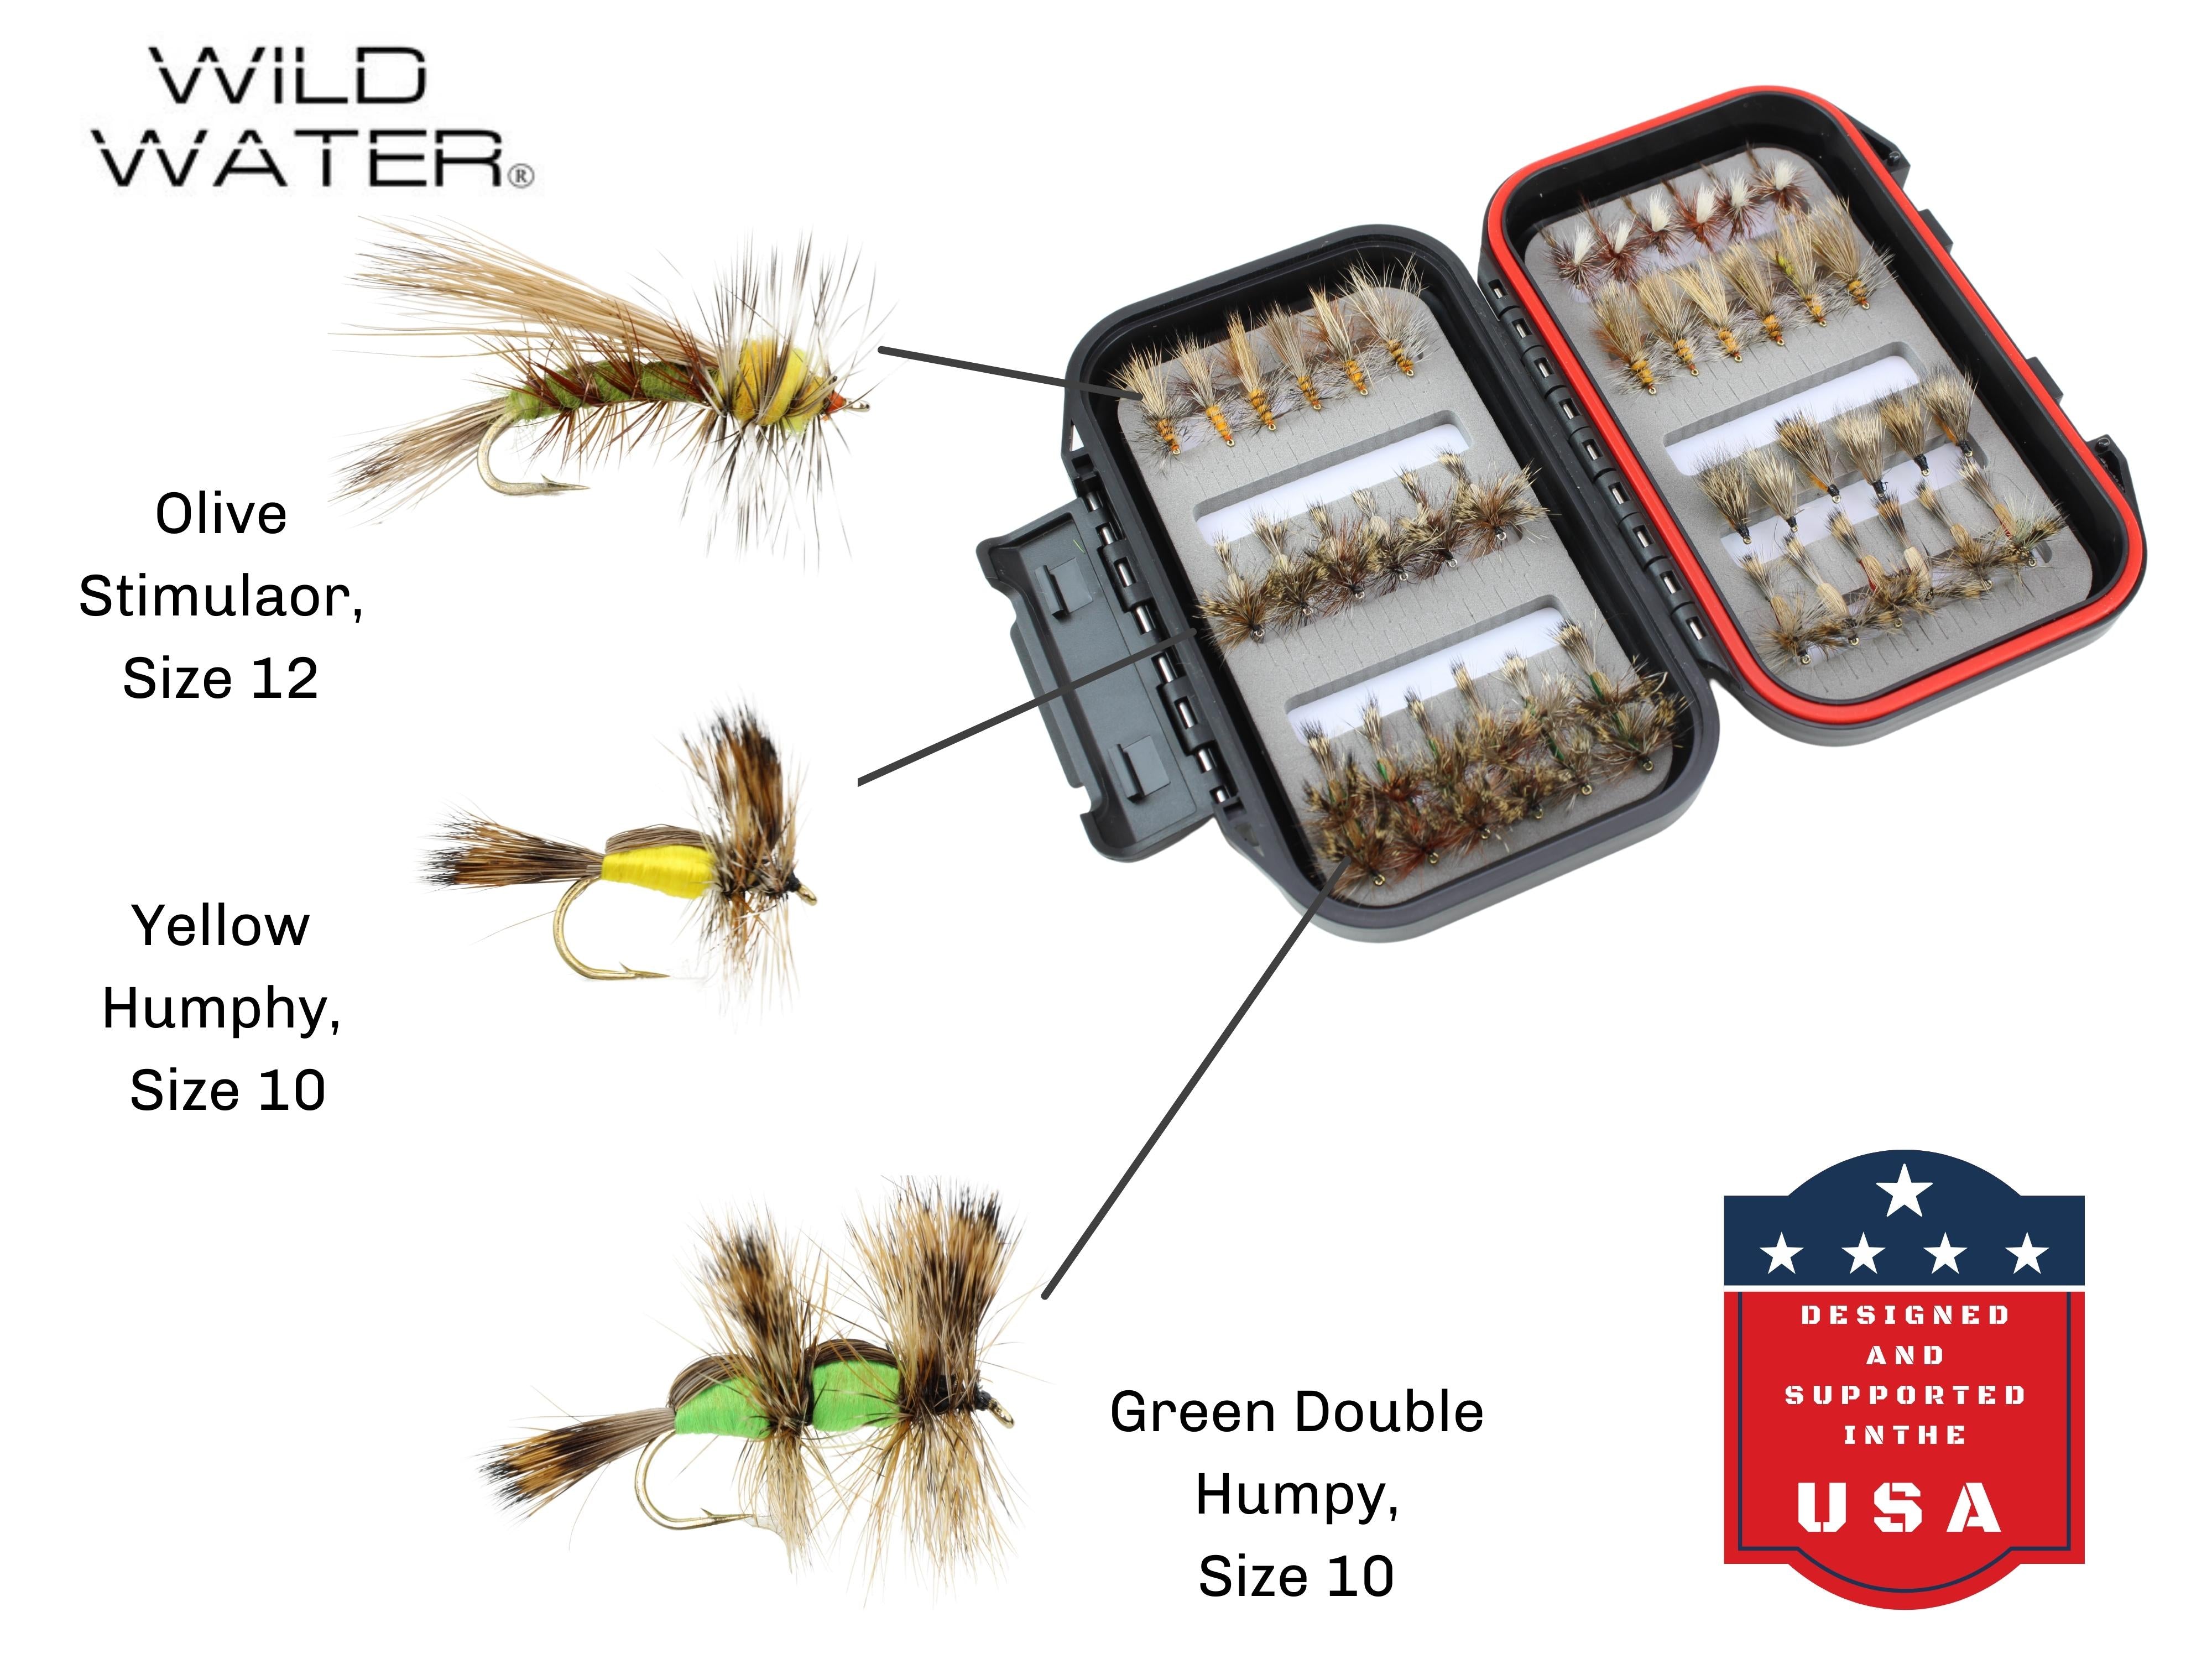 Wild Water Attractor/Trout Stimulator Fly Assortment, 42 Flies with Small Fly Box